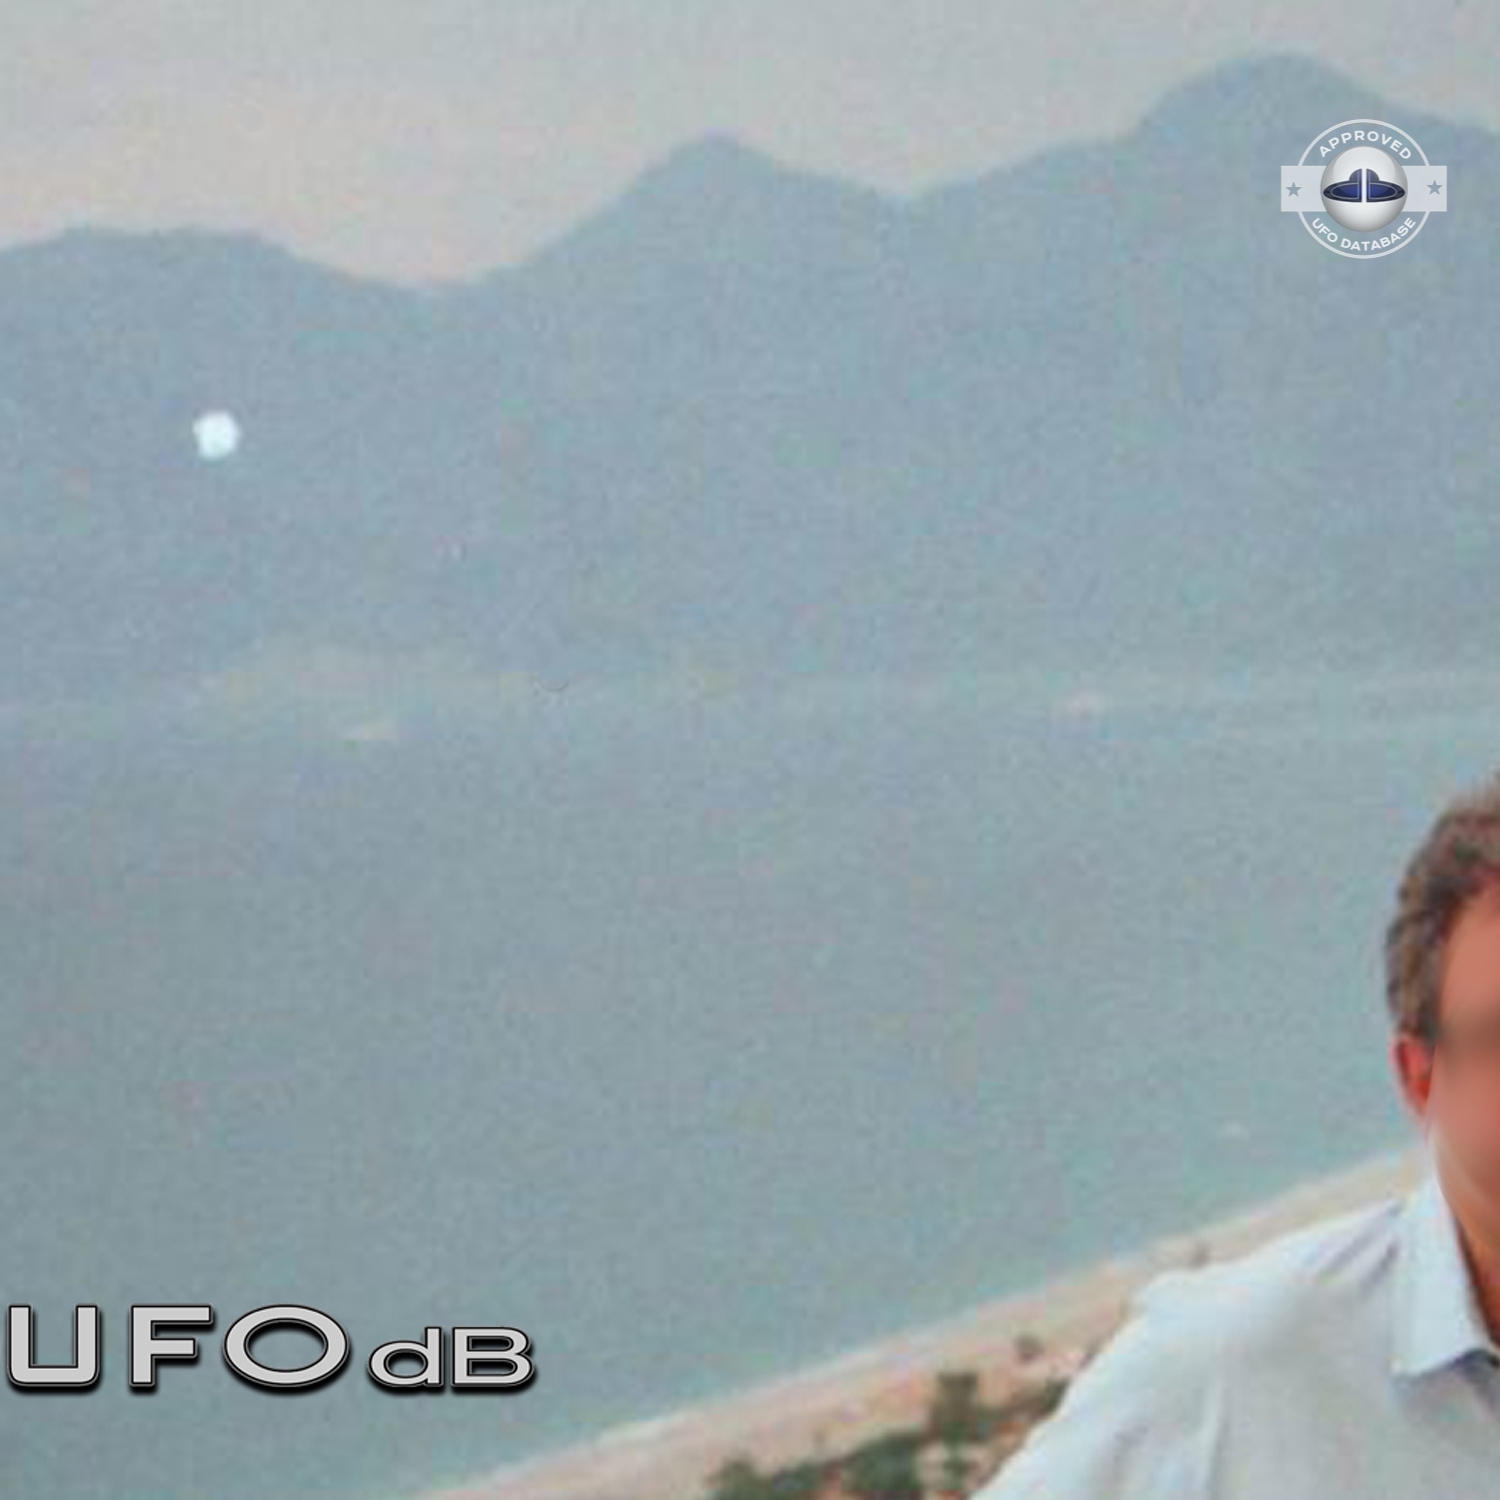 UFO passing over unknown body of water somewhere in Turkey | May 2003 UFO Picture #173-2